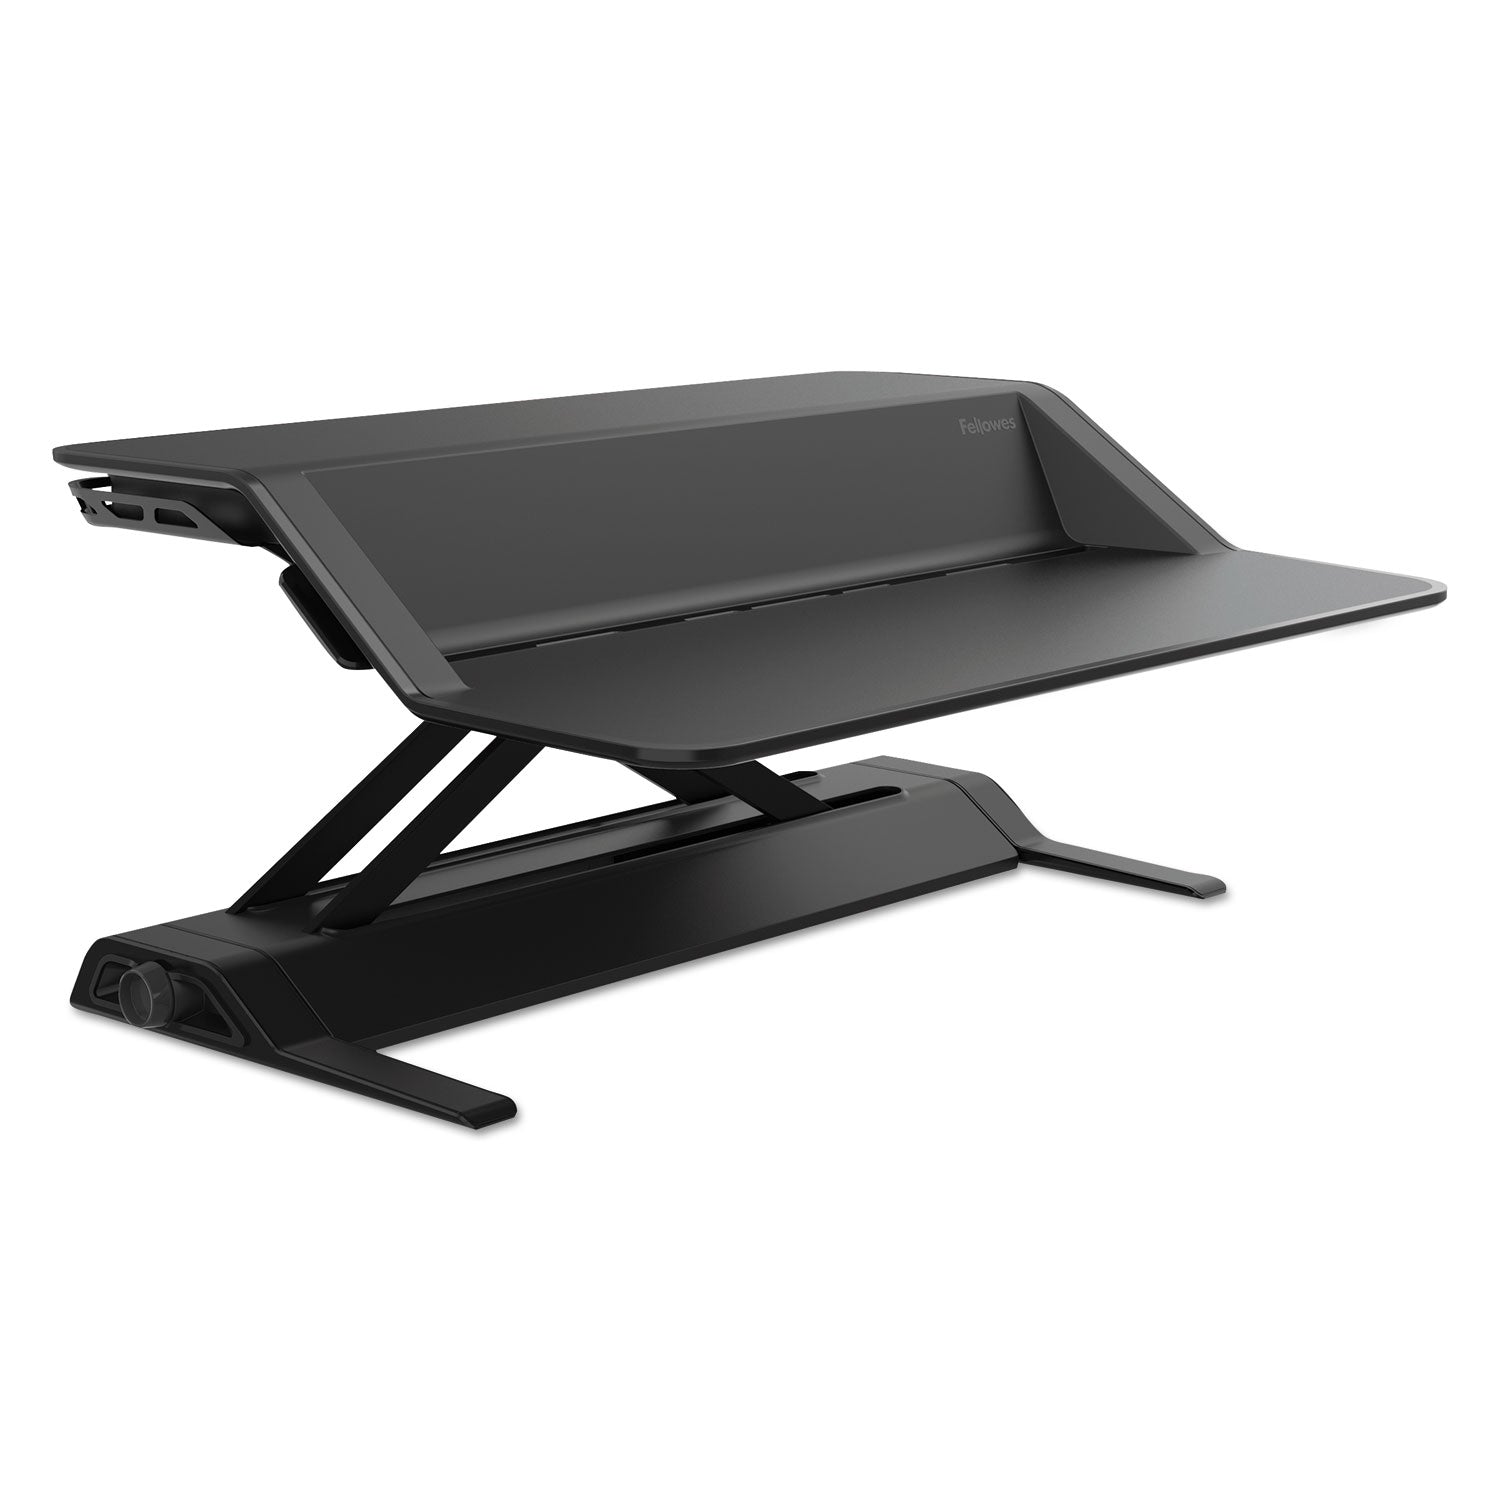 Lotus Sit-Stands Workstation, 32.75" x 24.25" x 5.5" to 22.5", Black - 5